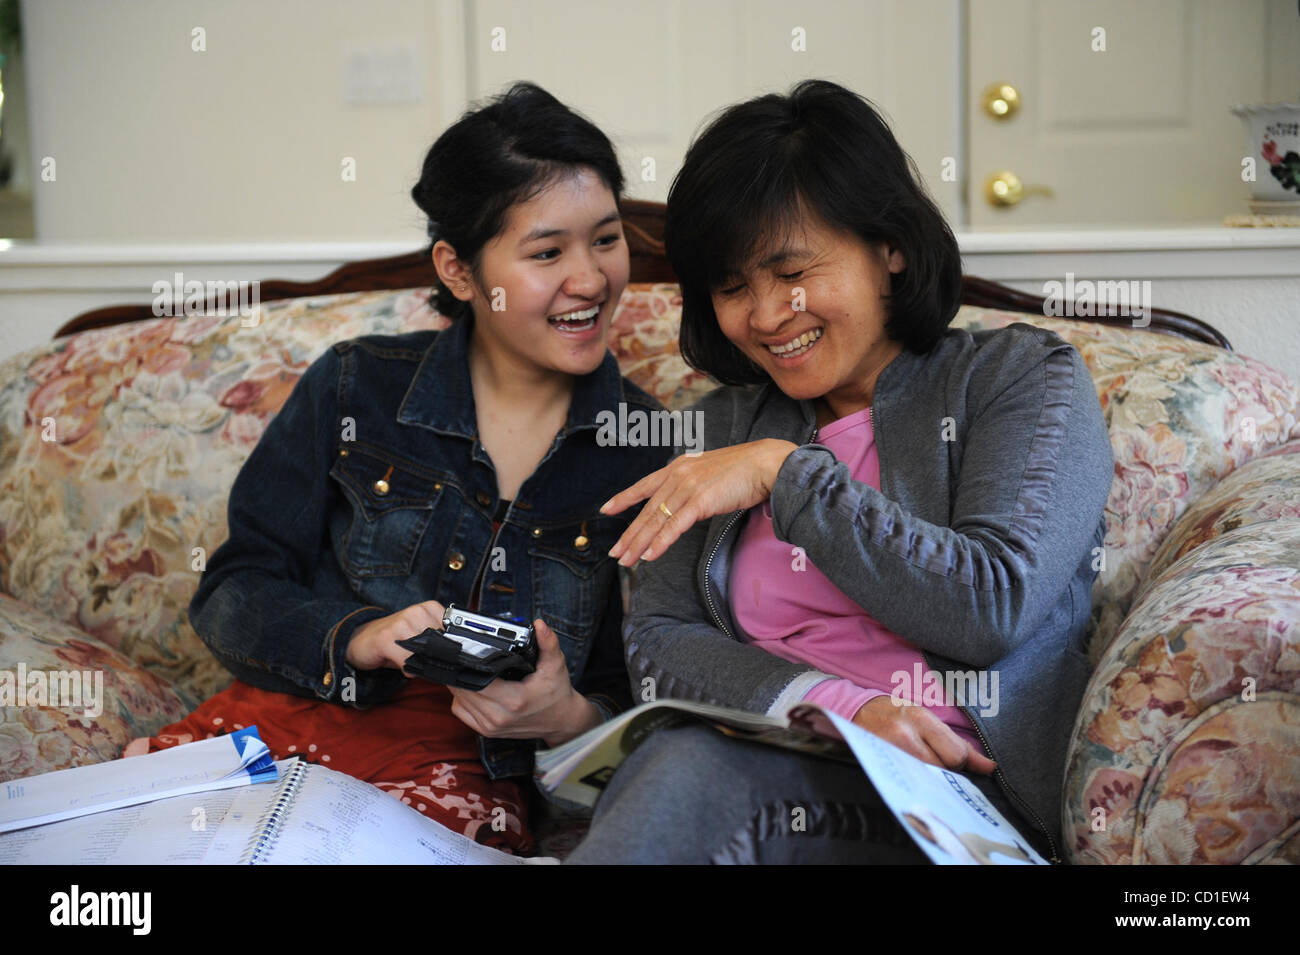 SPELLING BEE --   Josephine Kao, 12, shares some words with her mother Peggy, during a piano lesson on Tuesday, March 25, 2008 in Roseville. Kao, is a three time Regional Spelling Bee Champion that started in spelling competitions with the help of her mother, who is her main companion on her journey Stock Photo